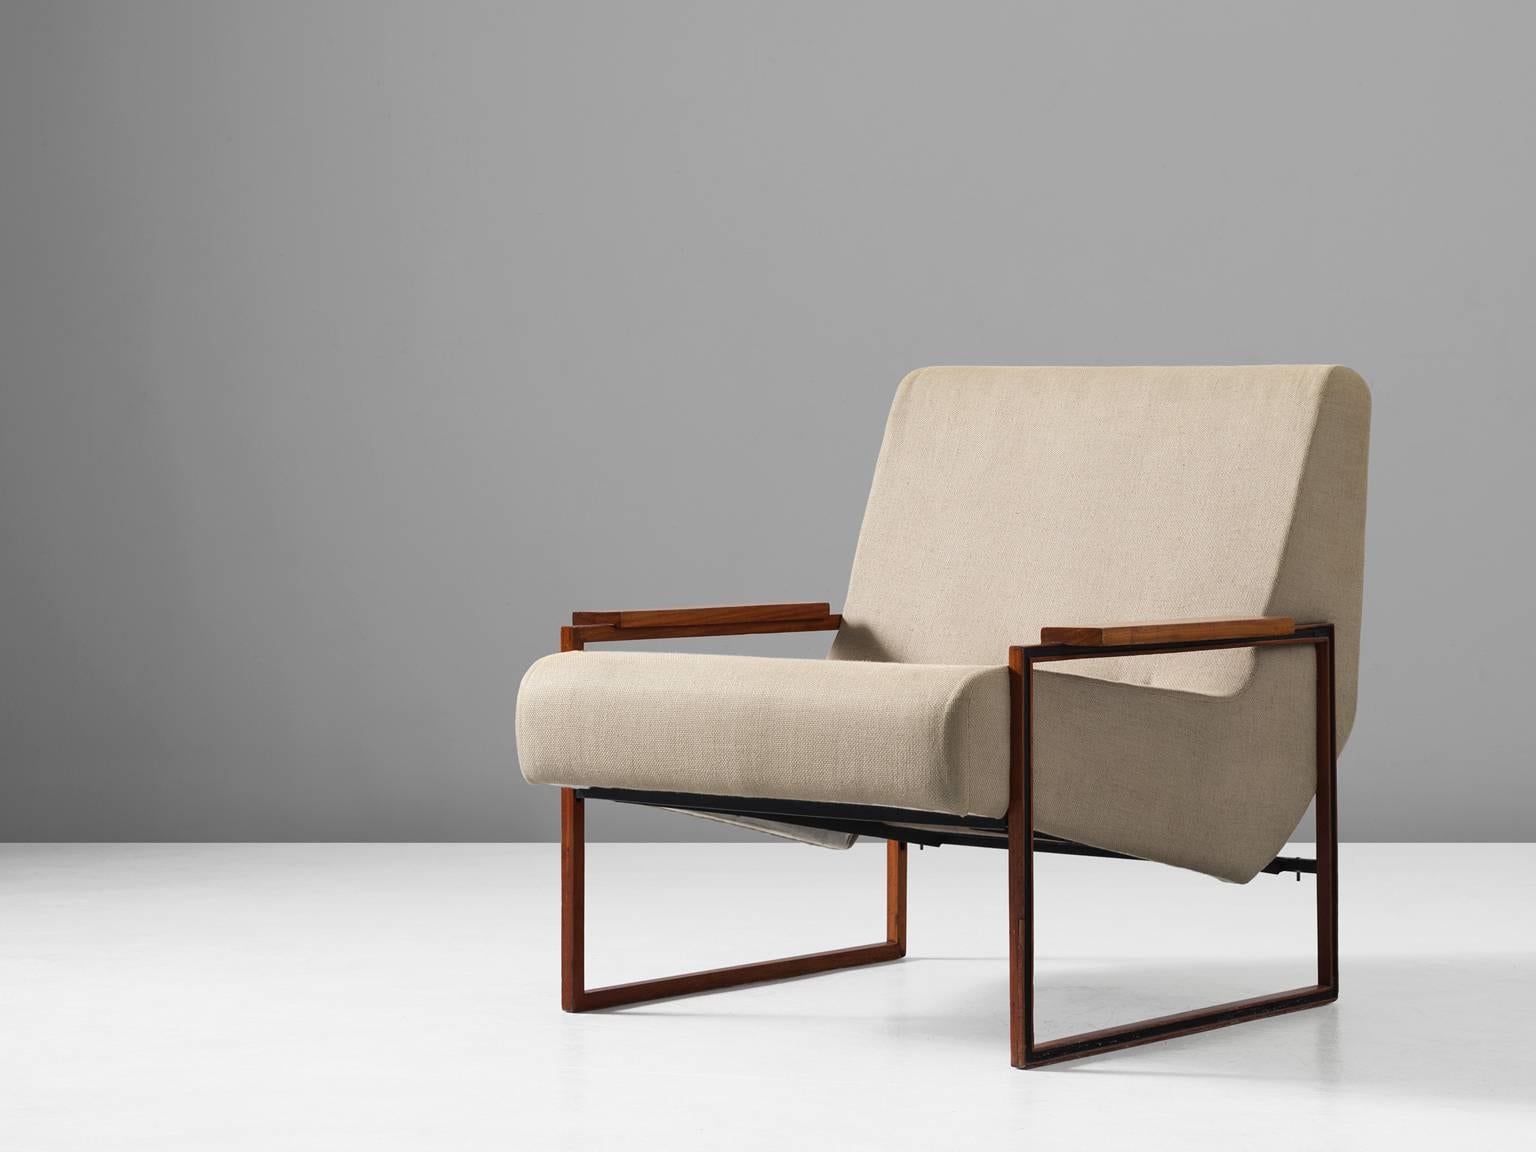 Lounge chair, in metal mahogany and fabric, by Percival Lafer, Brazil 1960s. 

Modern armchair by Brazilian designer Percival Lafer. This chair shows stunning lines. The frame is made of two metal squares with mahogany wood. Seating and back show